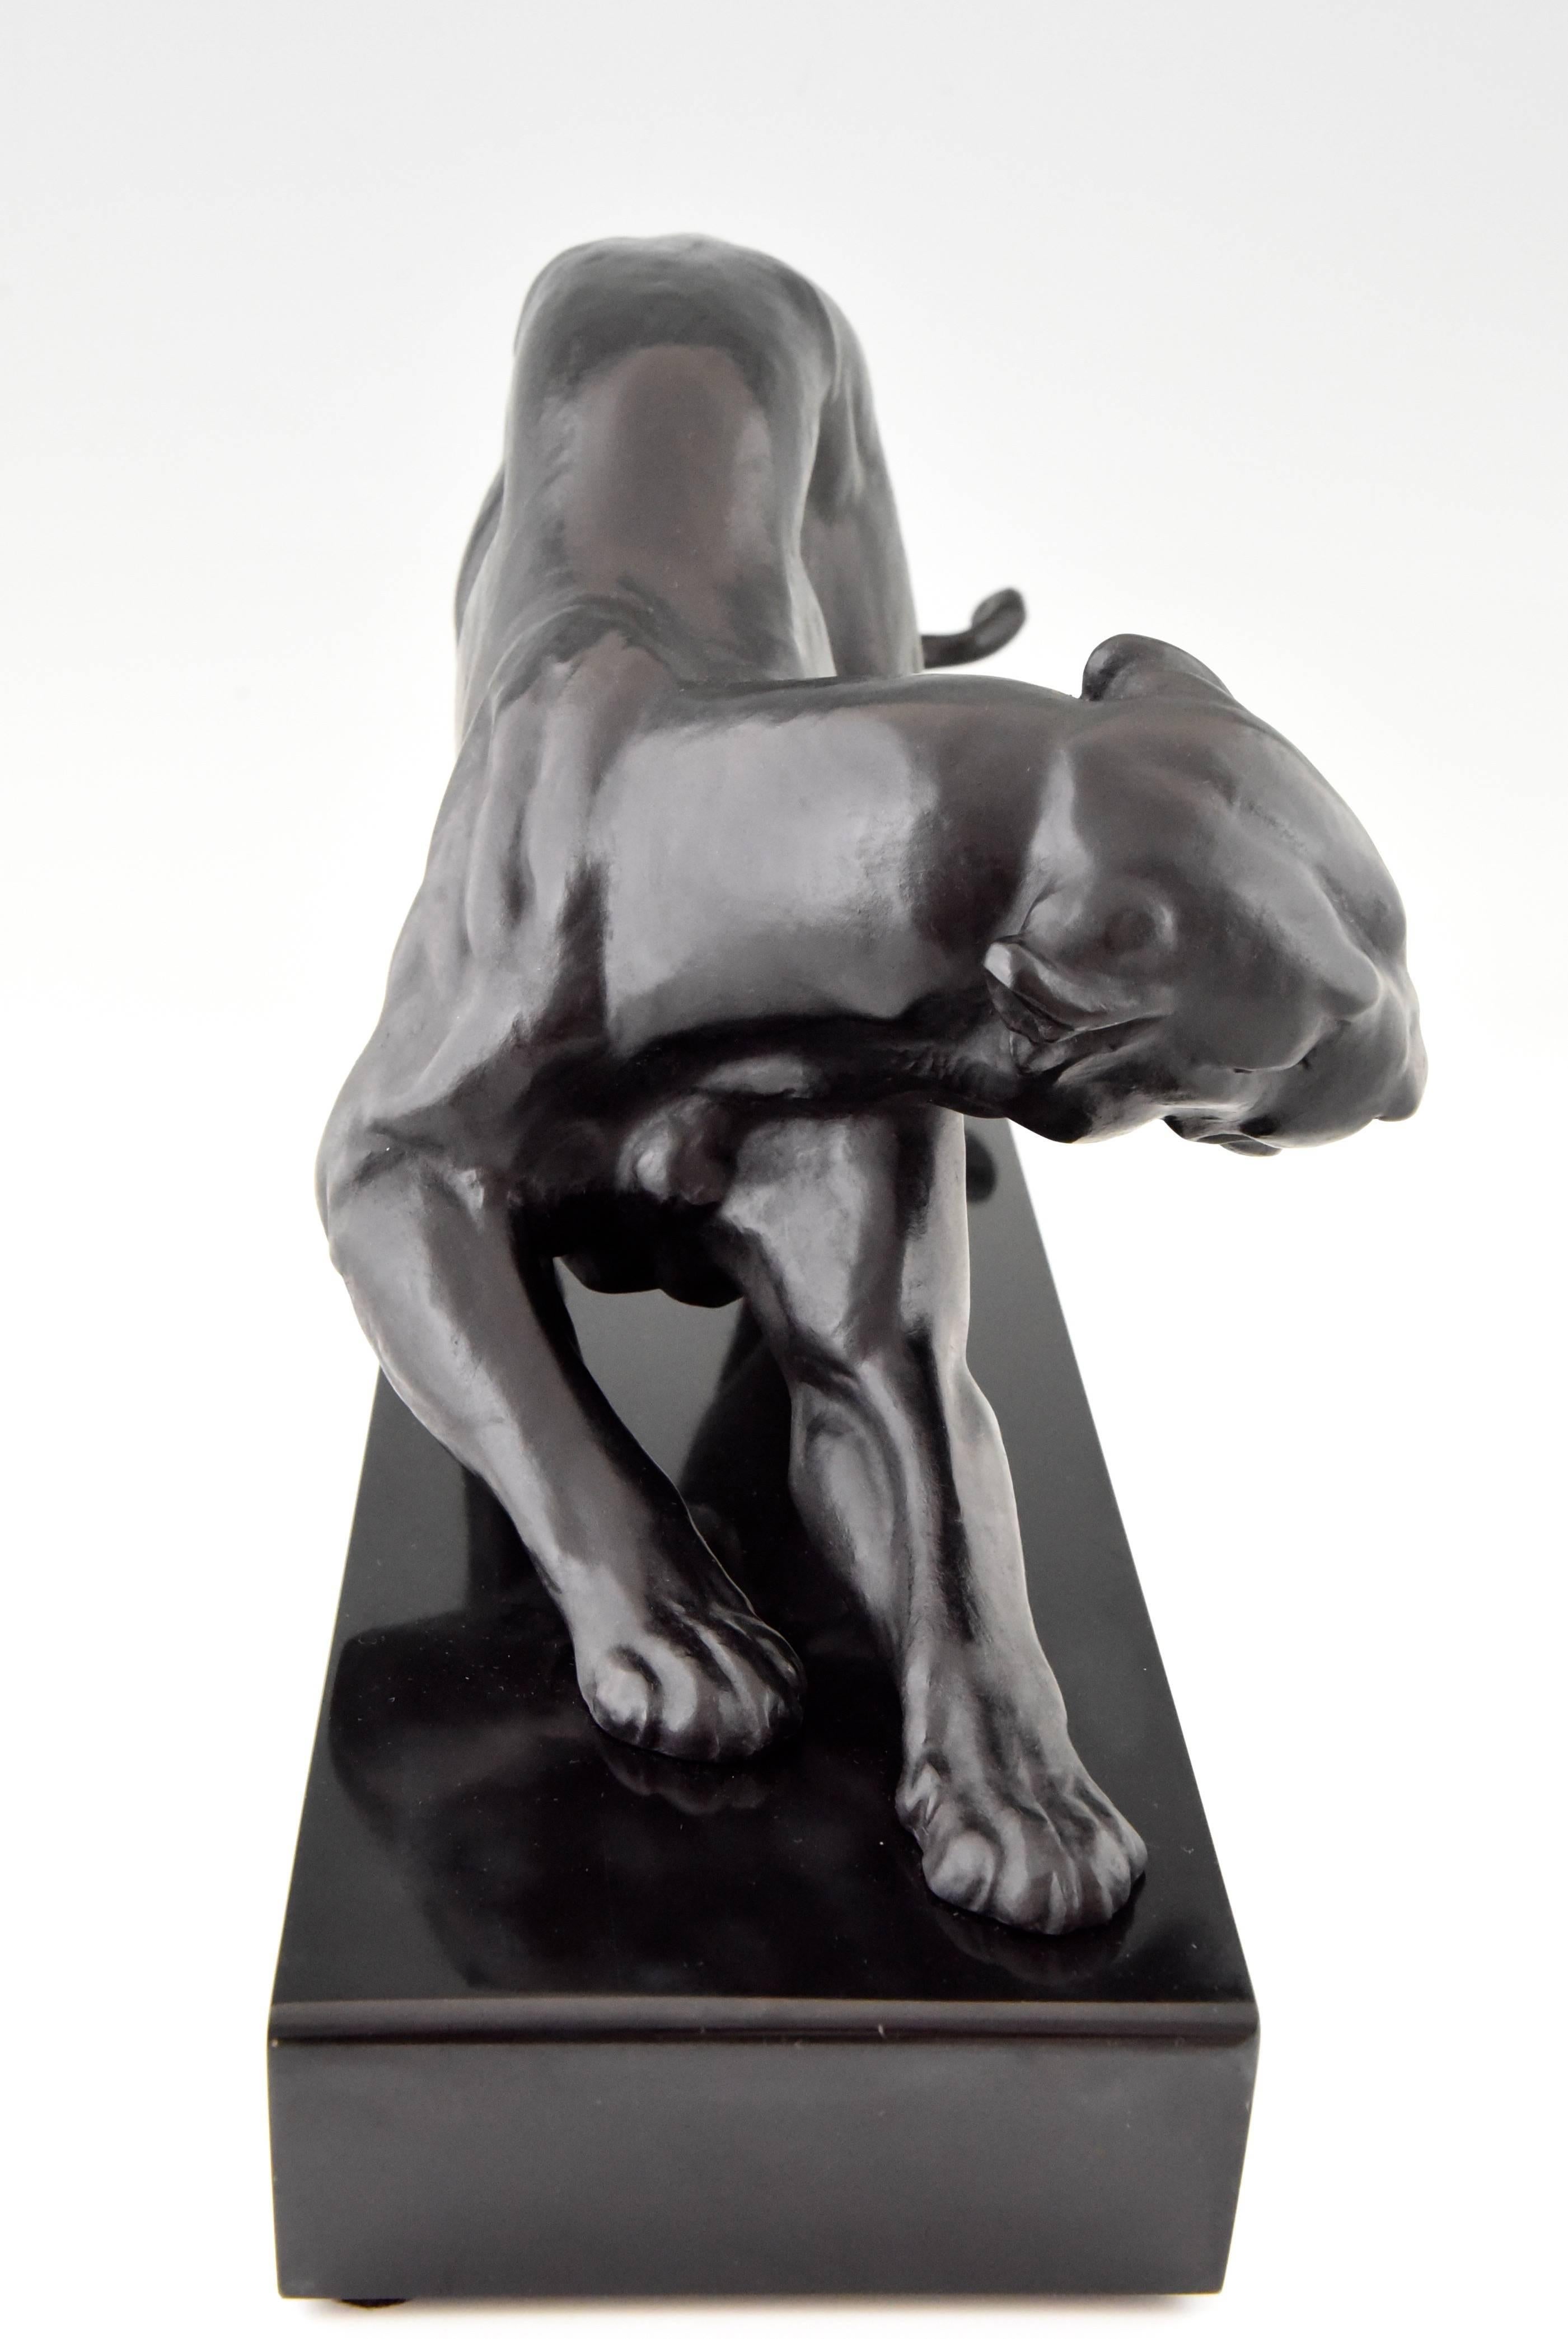 20th Century French Art Deco Panther Sculpture by Plagnet, 1930